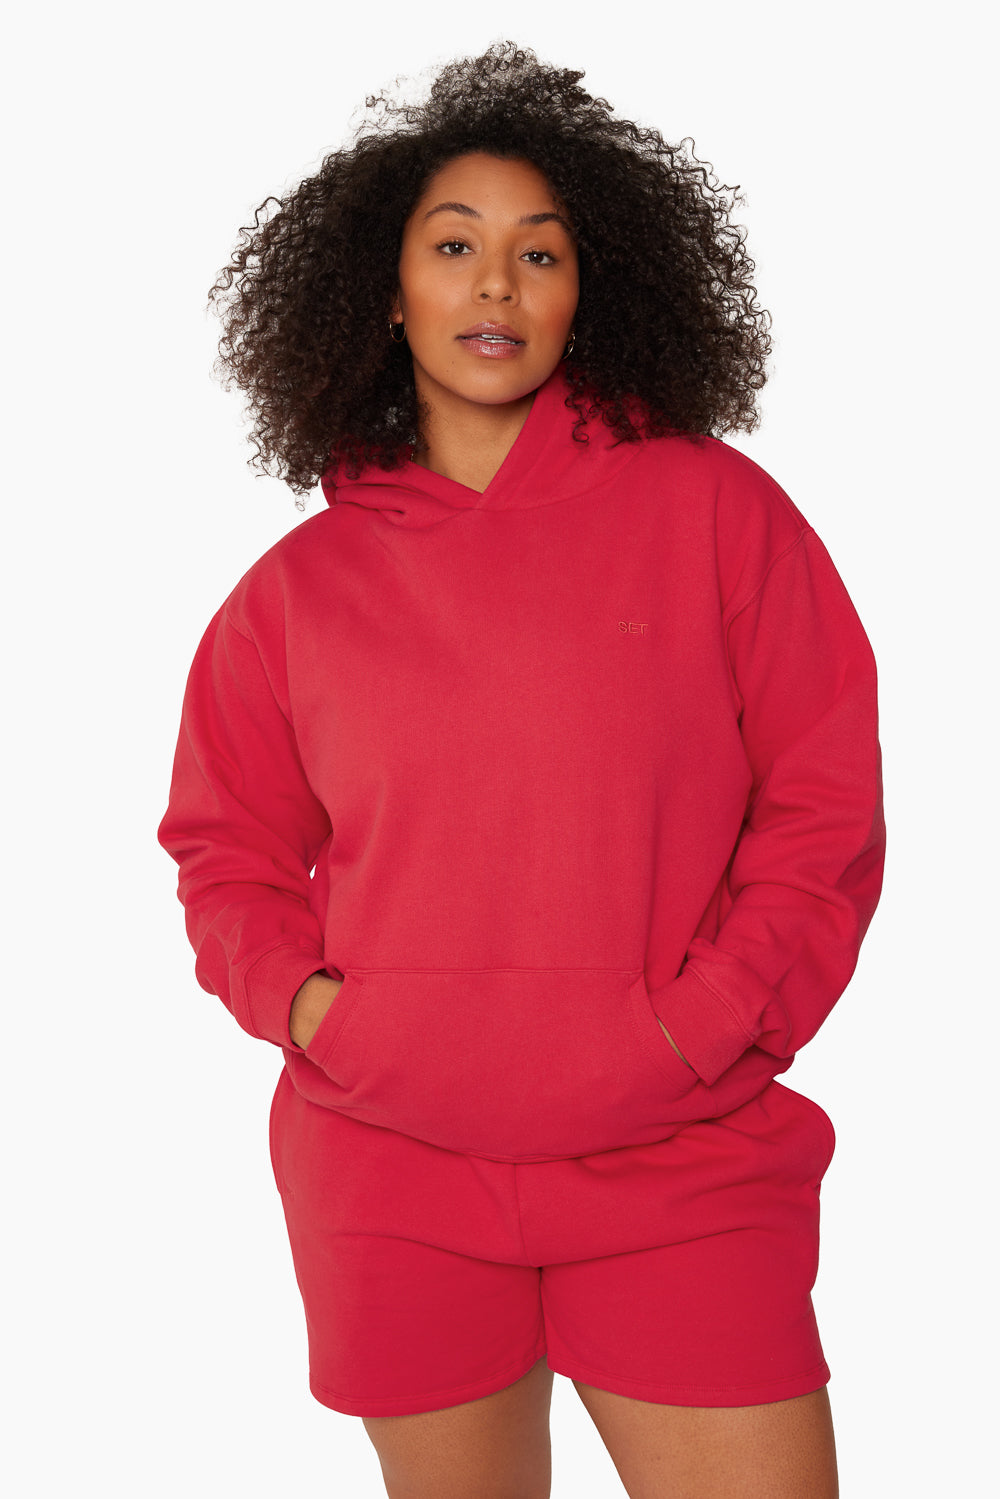 HEAVYWEIGHT SWEATS HOODIE - SPICY Featured Image